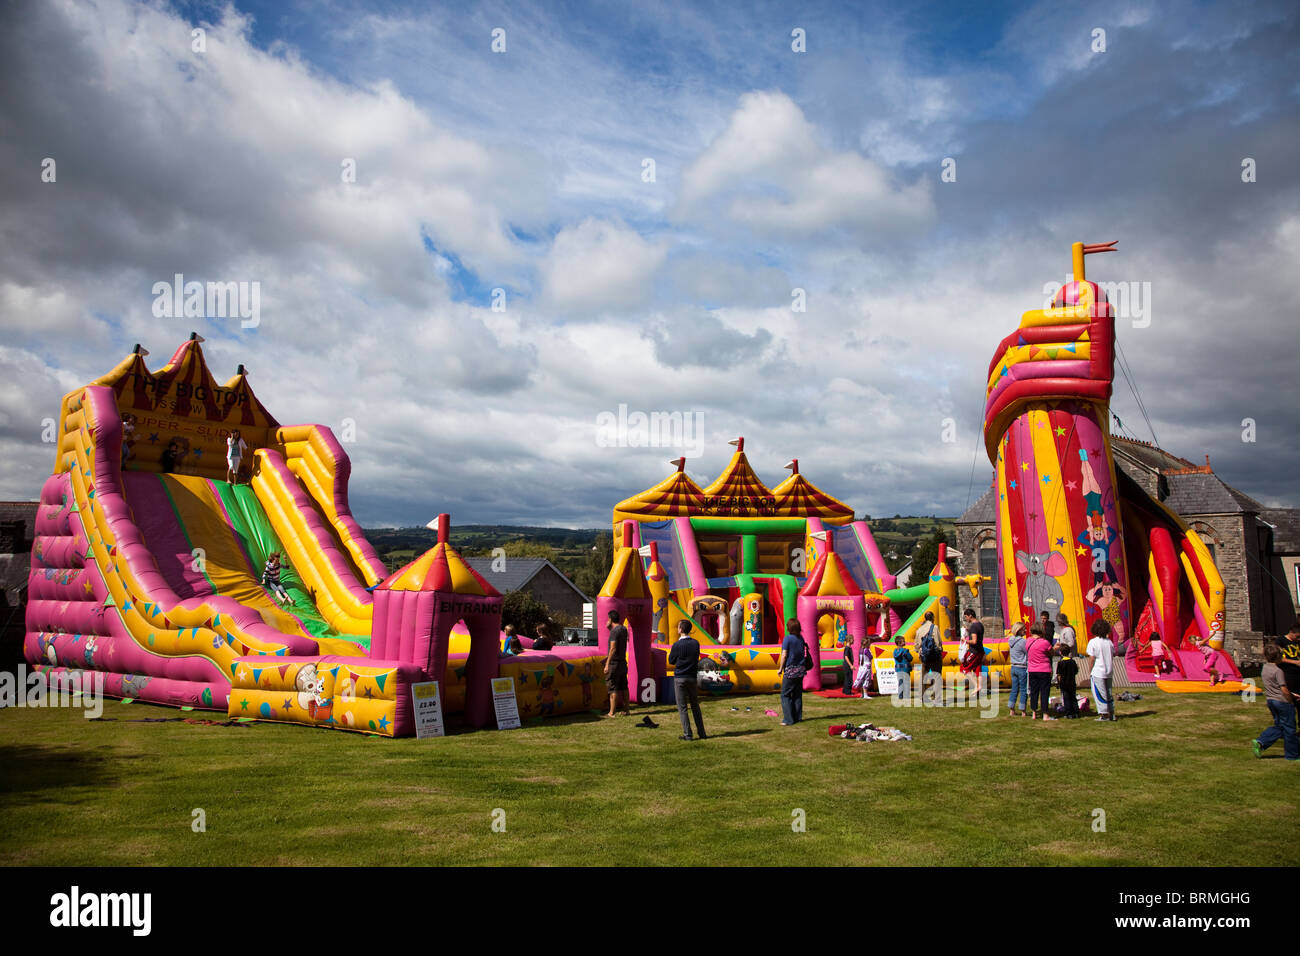 Bouncy castle and funfair attractions Talgarth Wales UK Stock Photo